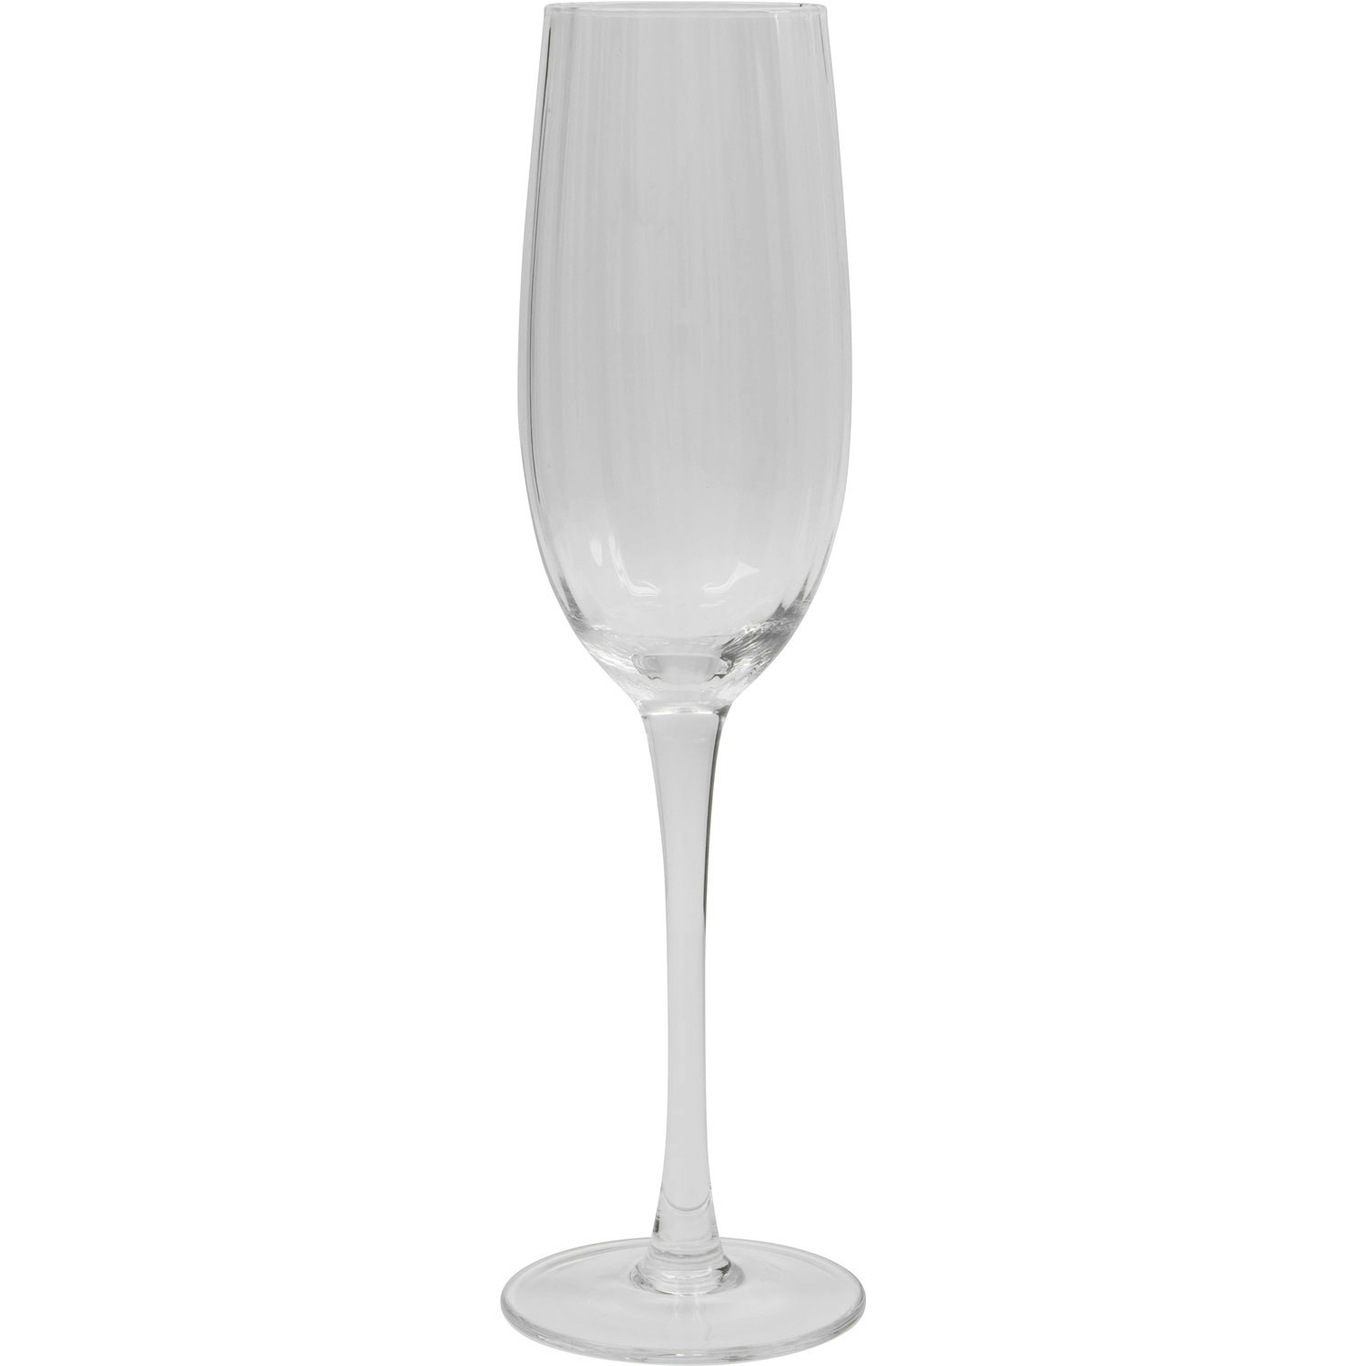 HDRill Champagnerglas 23 cl, Transparent